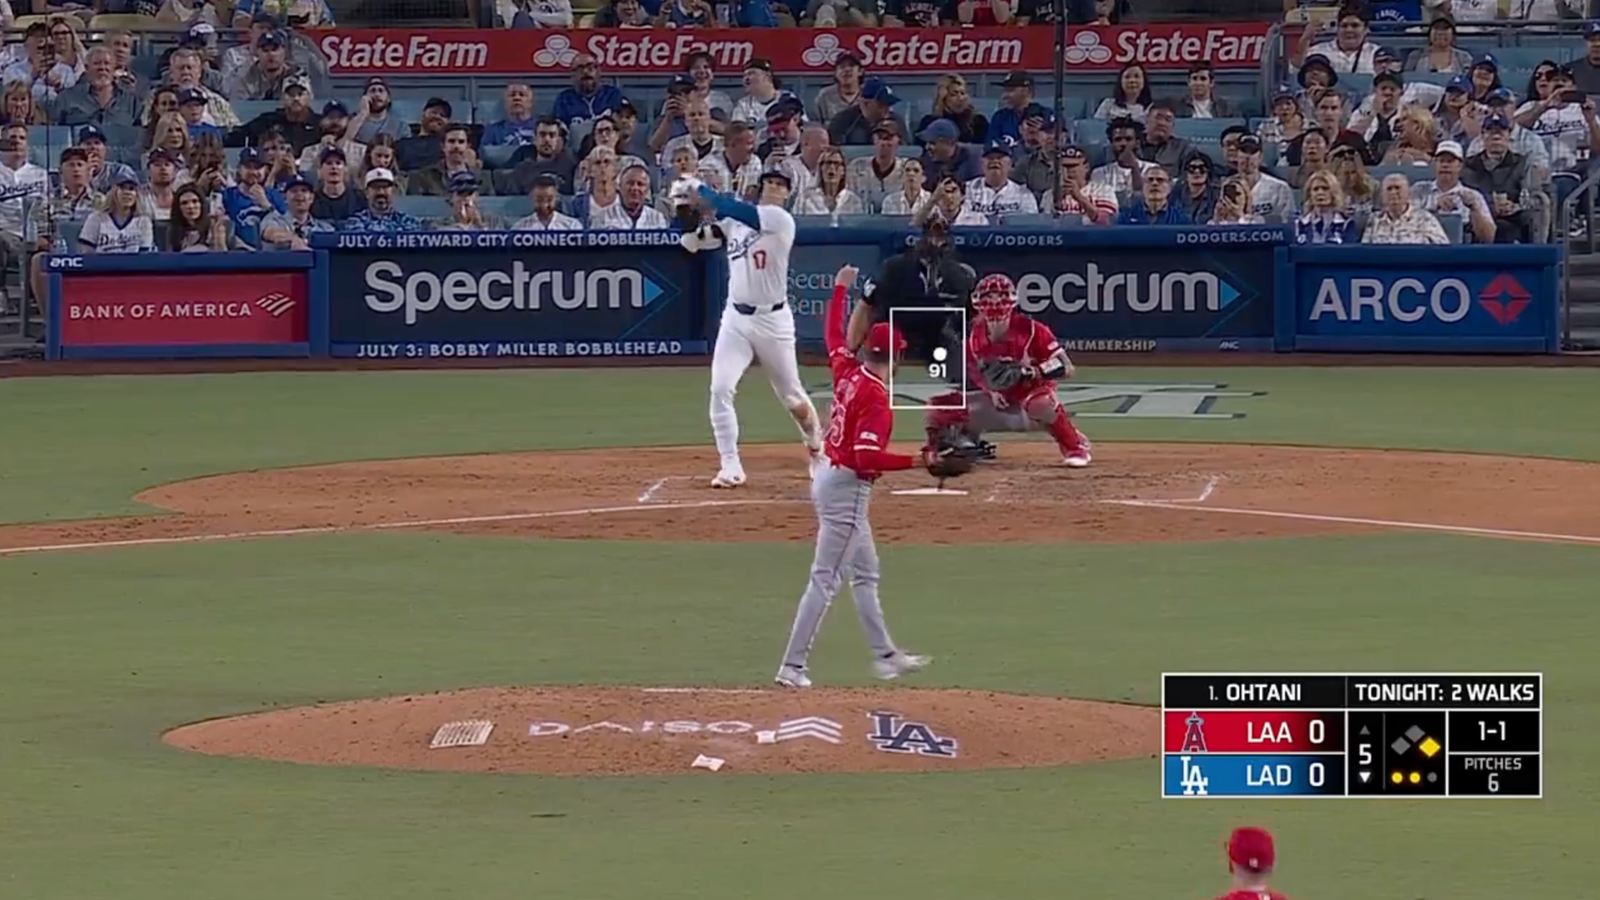 Shohei Ohtani launches a two-run home run to give Dodgers lead over Angels